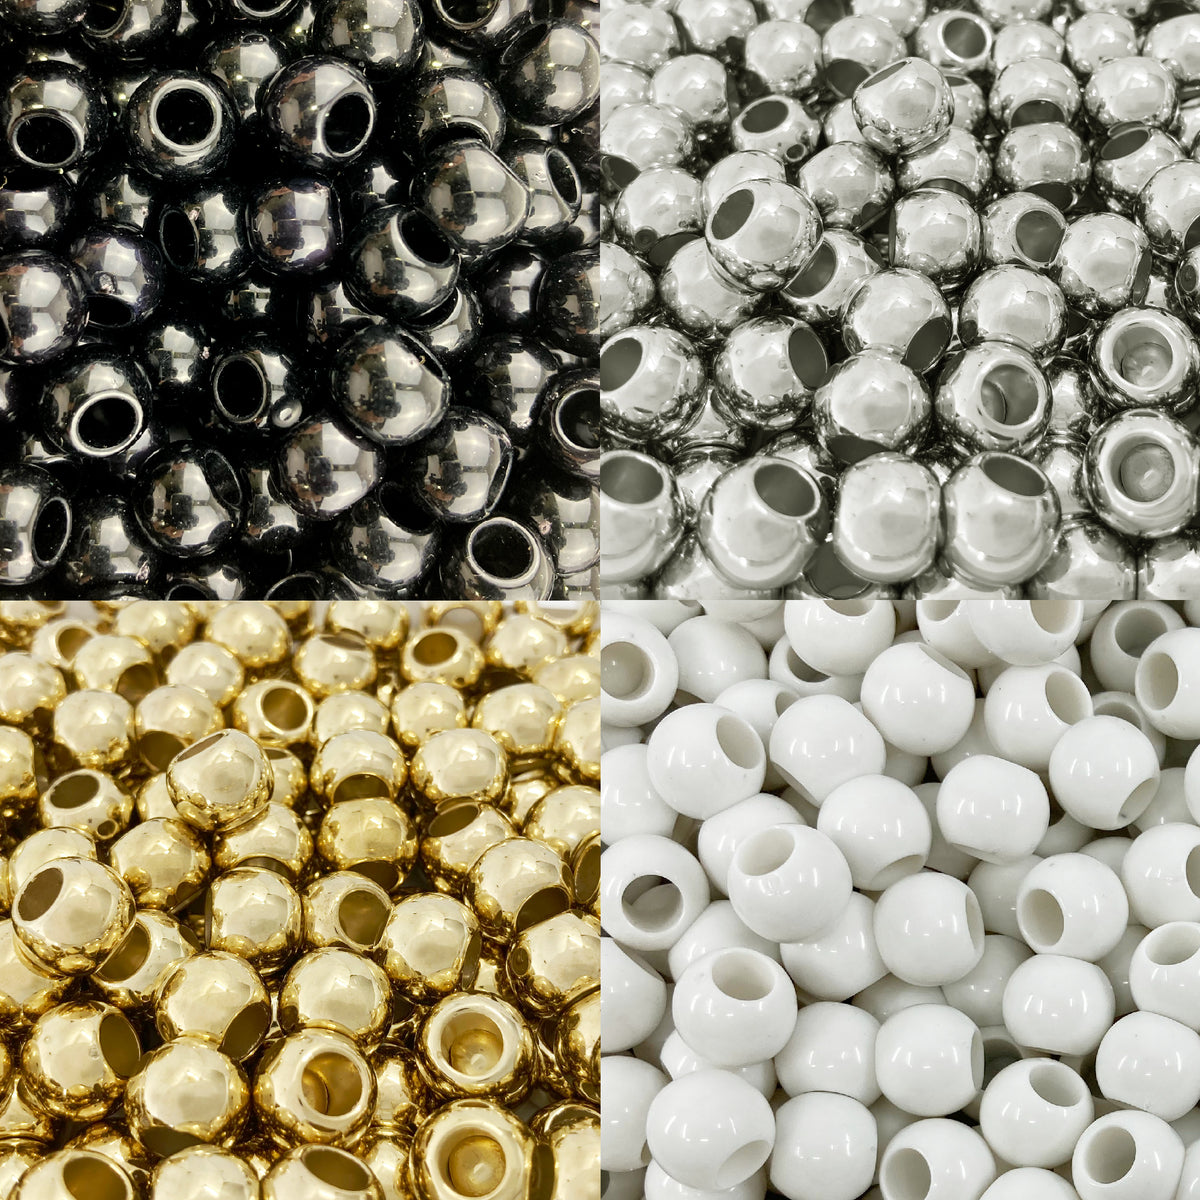 400 Matte Metallic Black Tie Mix Acrylic Large Hole Beads 12mm with 5.7mm  Hole in Black, White, Silver and Gold